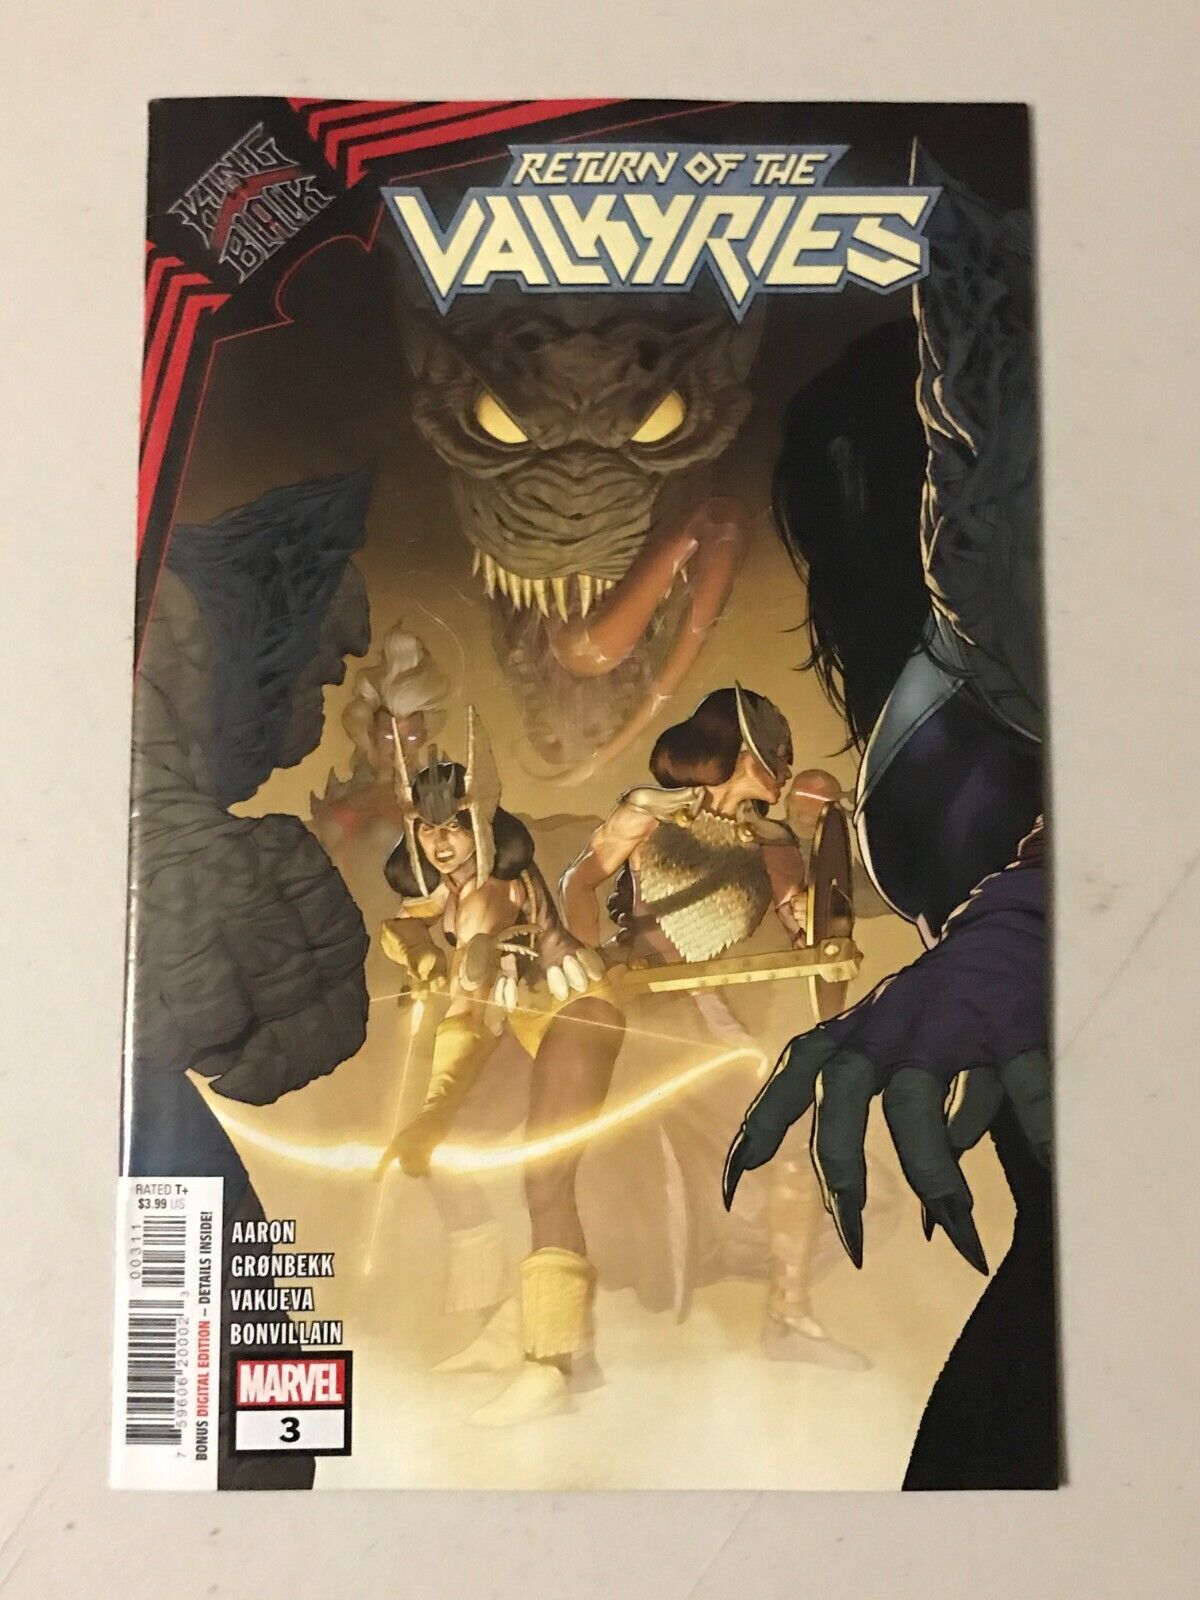 RETURN OF THE VALKYRIES #3 NM MARVEL 2021 - BACK ISSUE BLOWOUT!